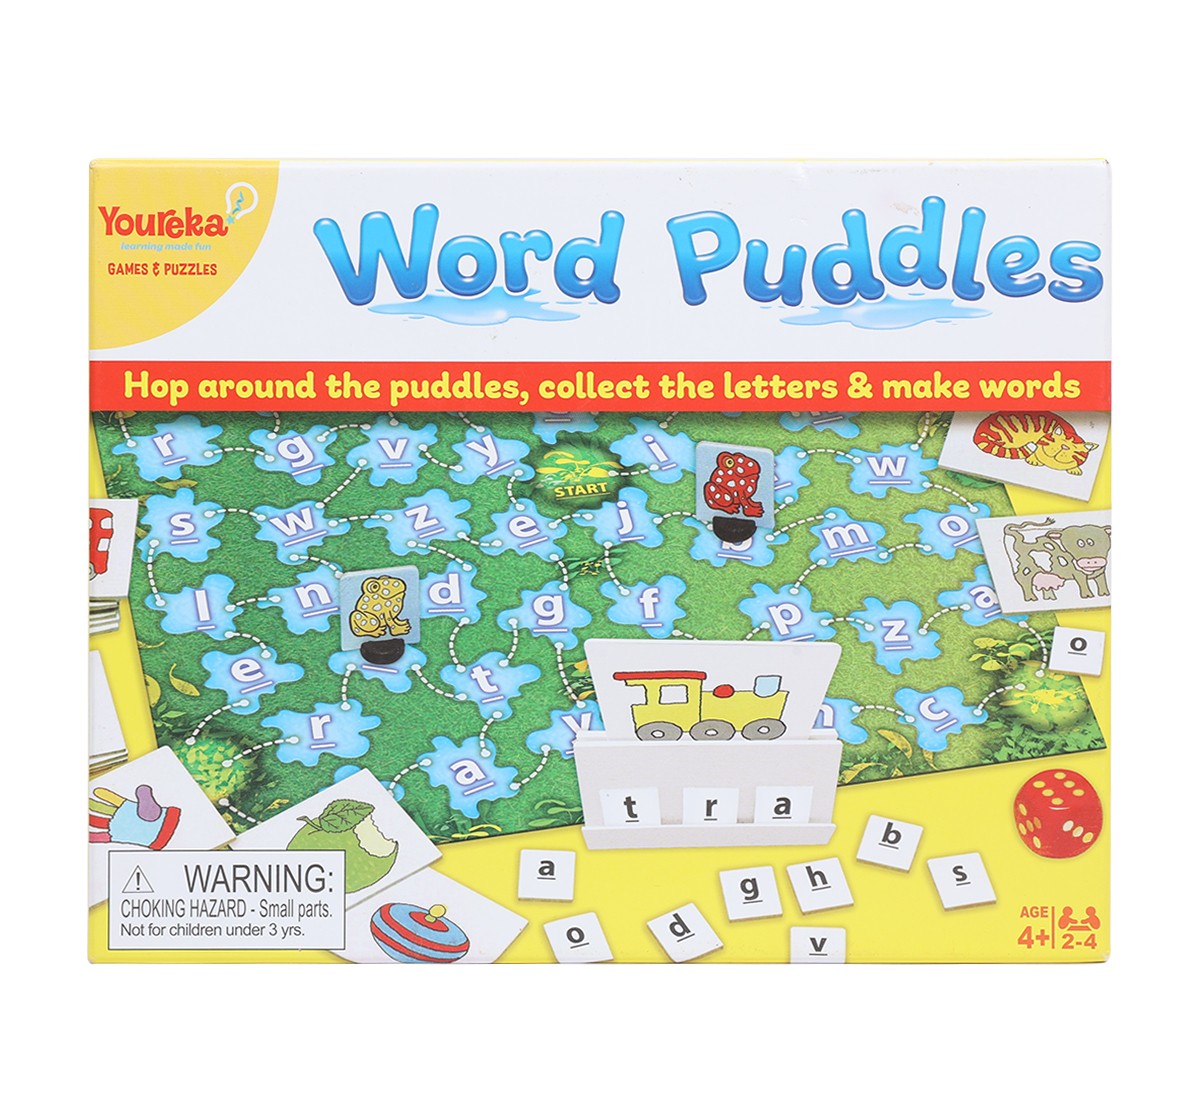 Youreka Word Puddles, 2-4 Players, Word Building Game, 4Yrs+